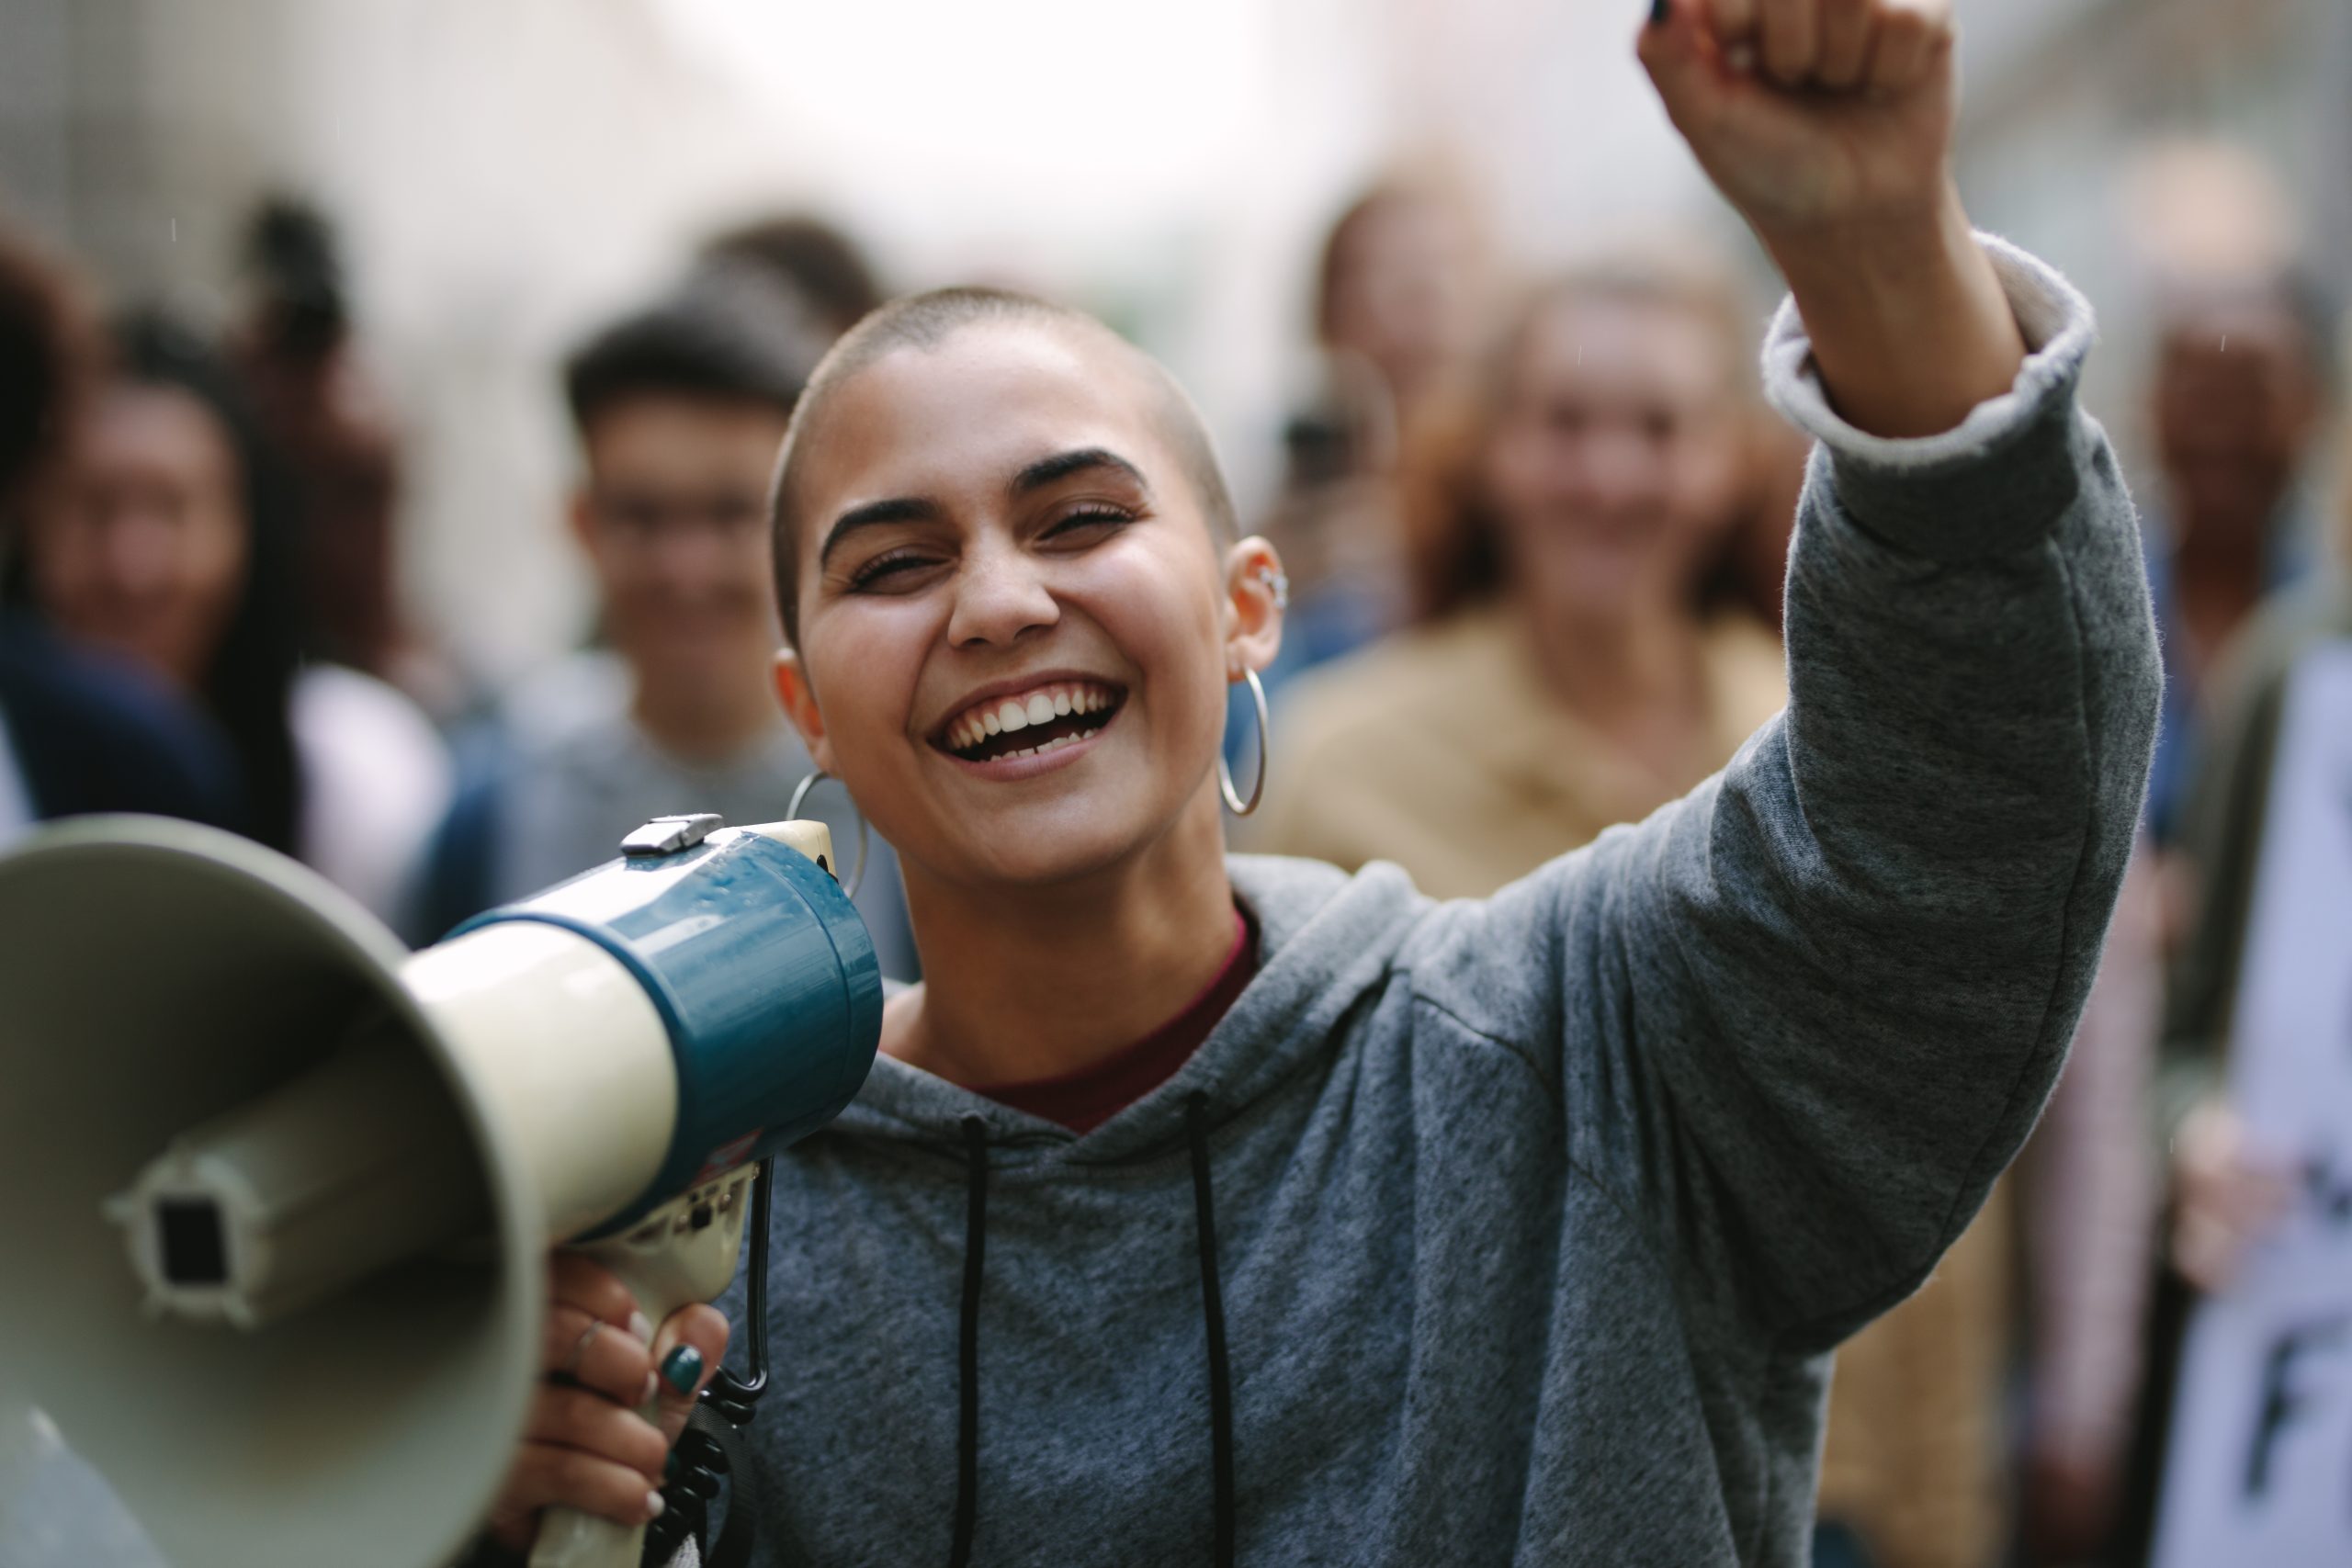 A White woman with a shaved head holds up a fist and a megaphone as she smiles